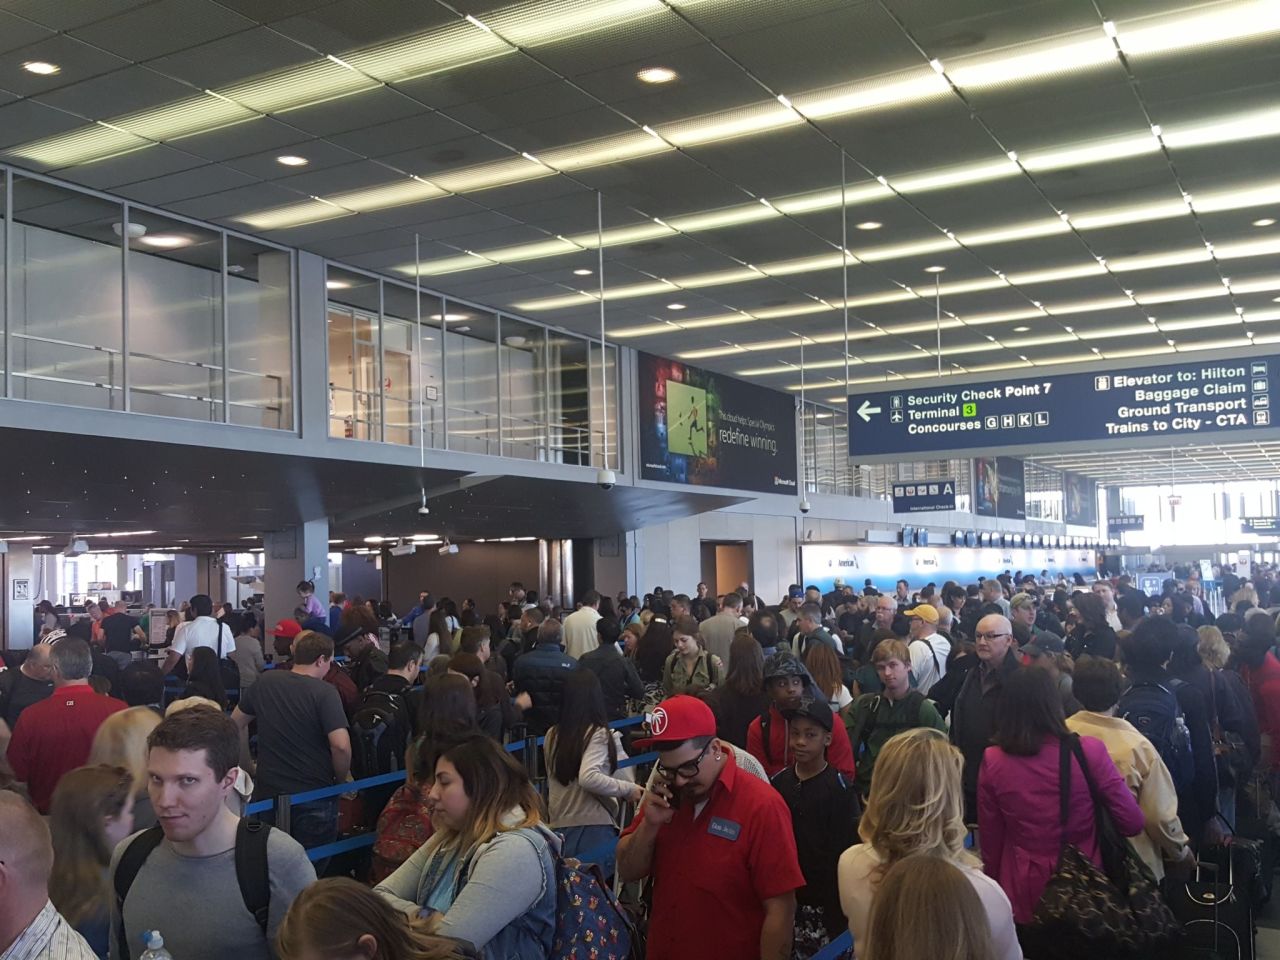 Jeff Graveline was flying out of O'Hare International Airport on Friday, May 13, and he said he waited in the security line for 80 minutes. He had to sprint to his gate, but he made his flight.